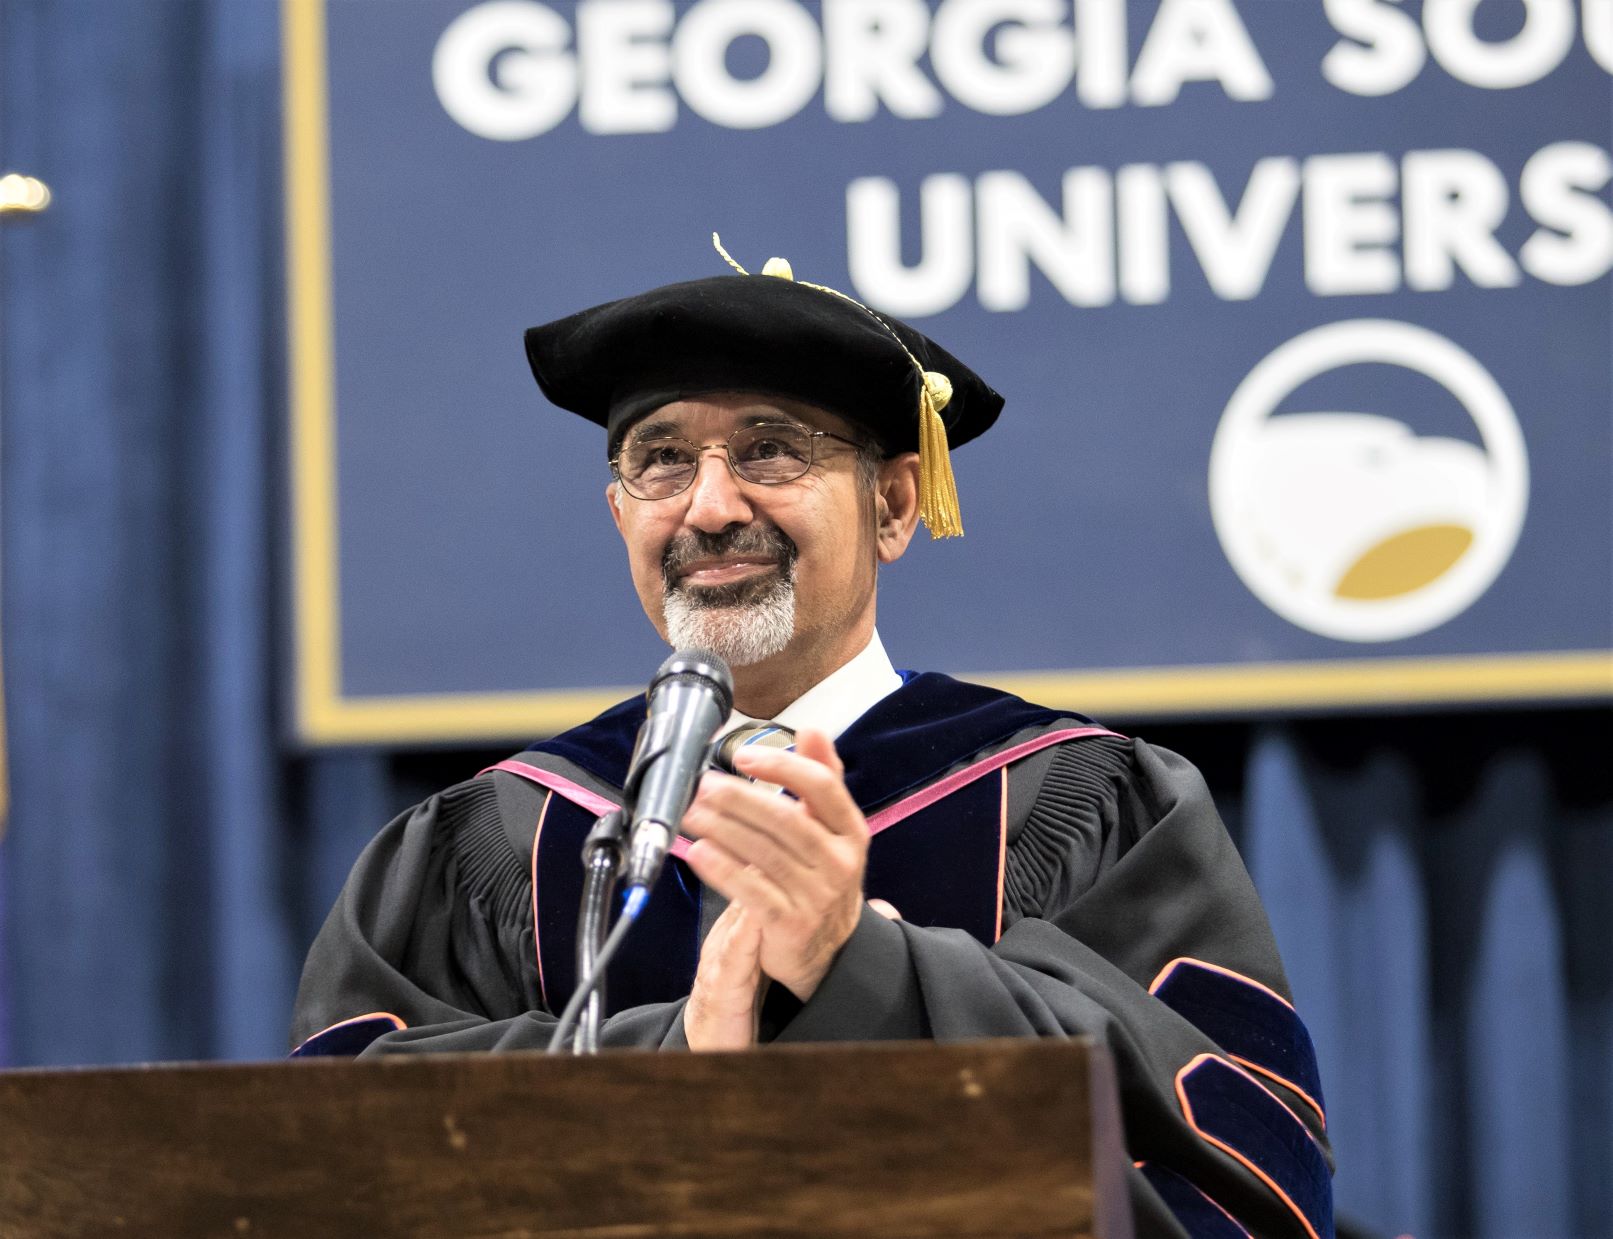 adult male wearing graduation regalia clapping his hands